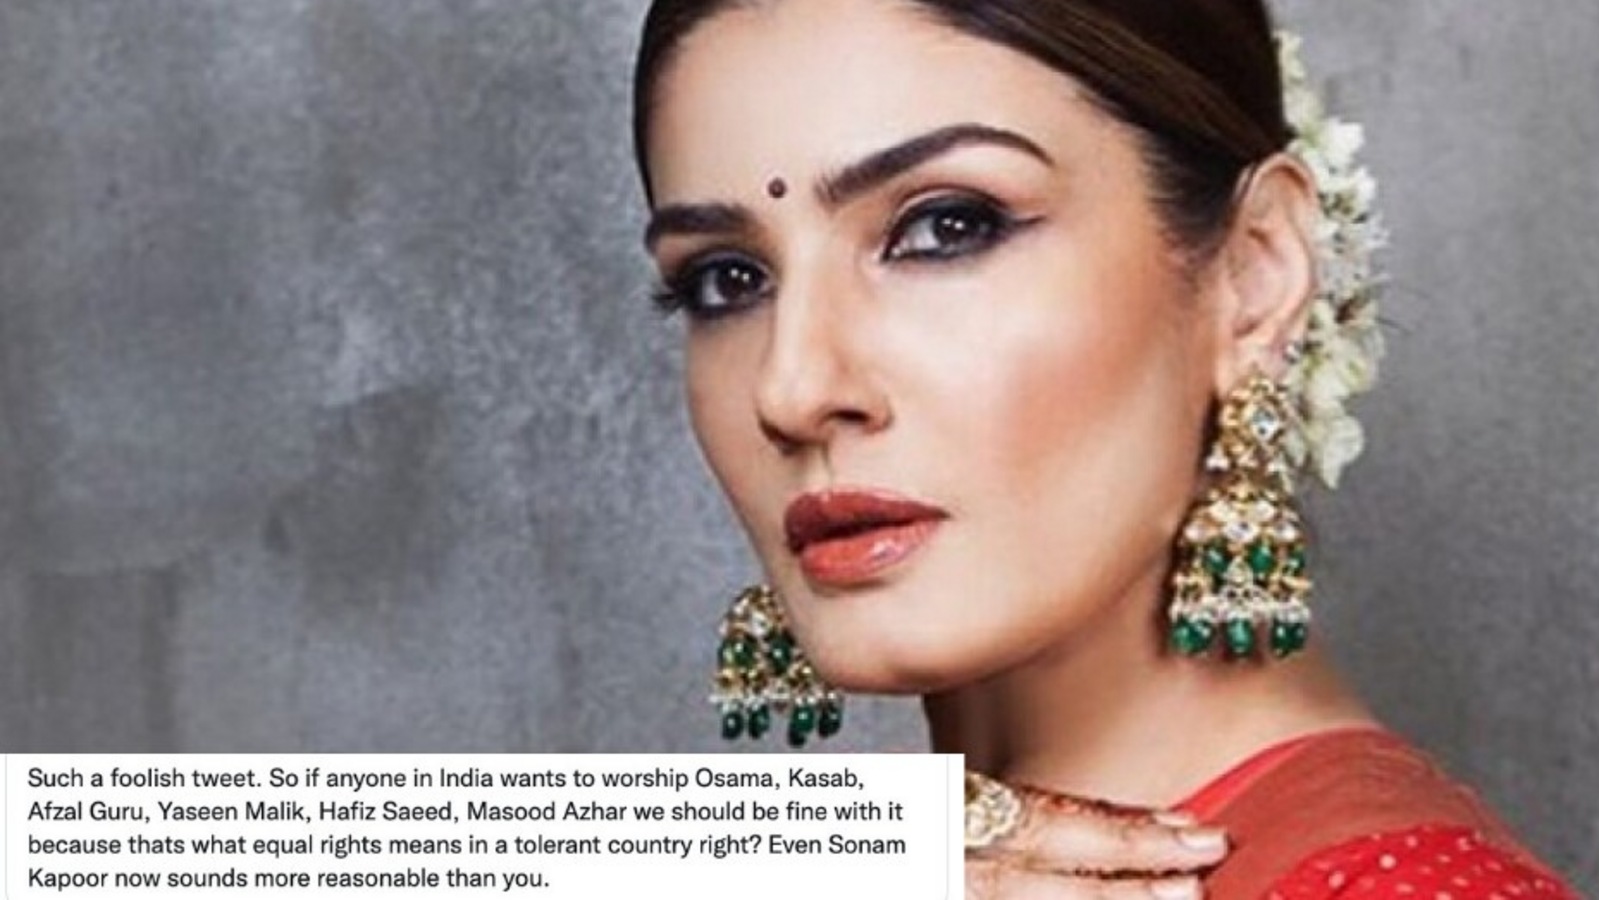 Raveena Tandon reacts as she’s called ‘less reasonable then Sonam Kapoor’ for her tweet defending religious tolerance